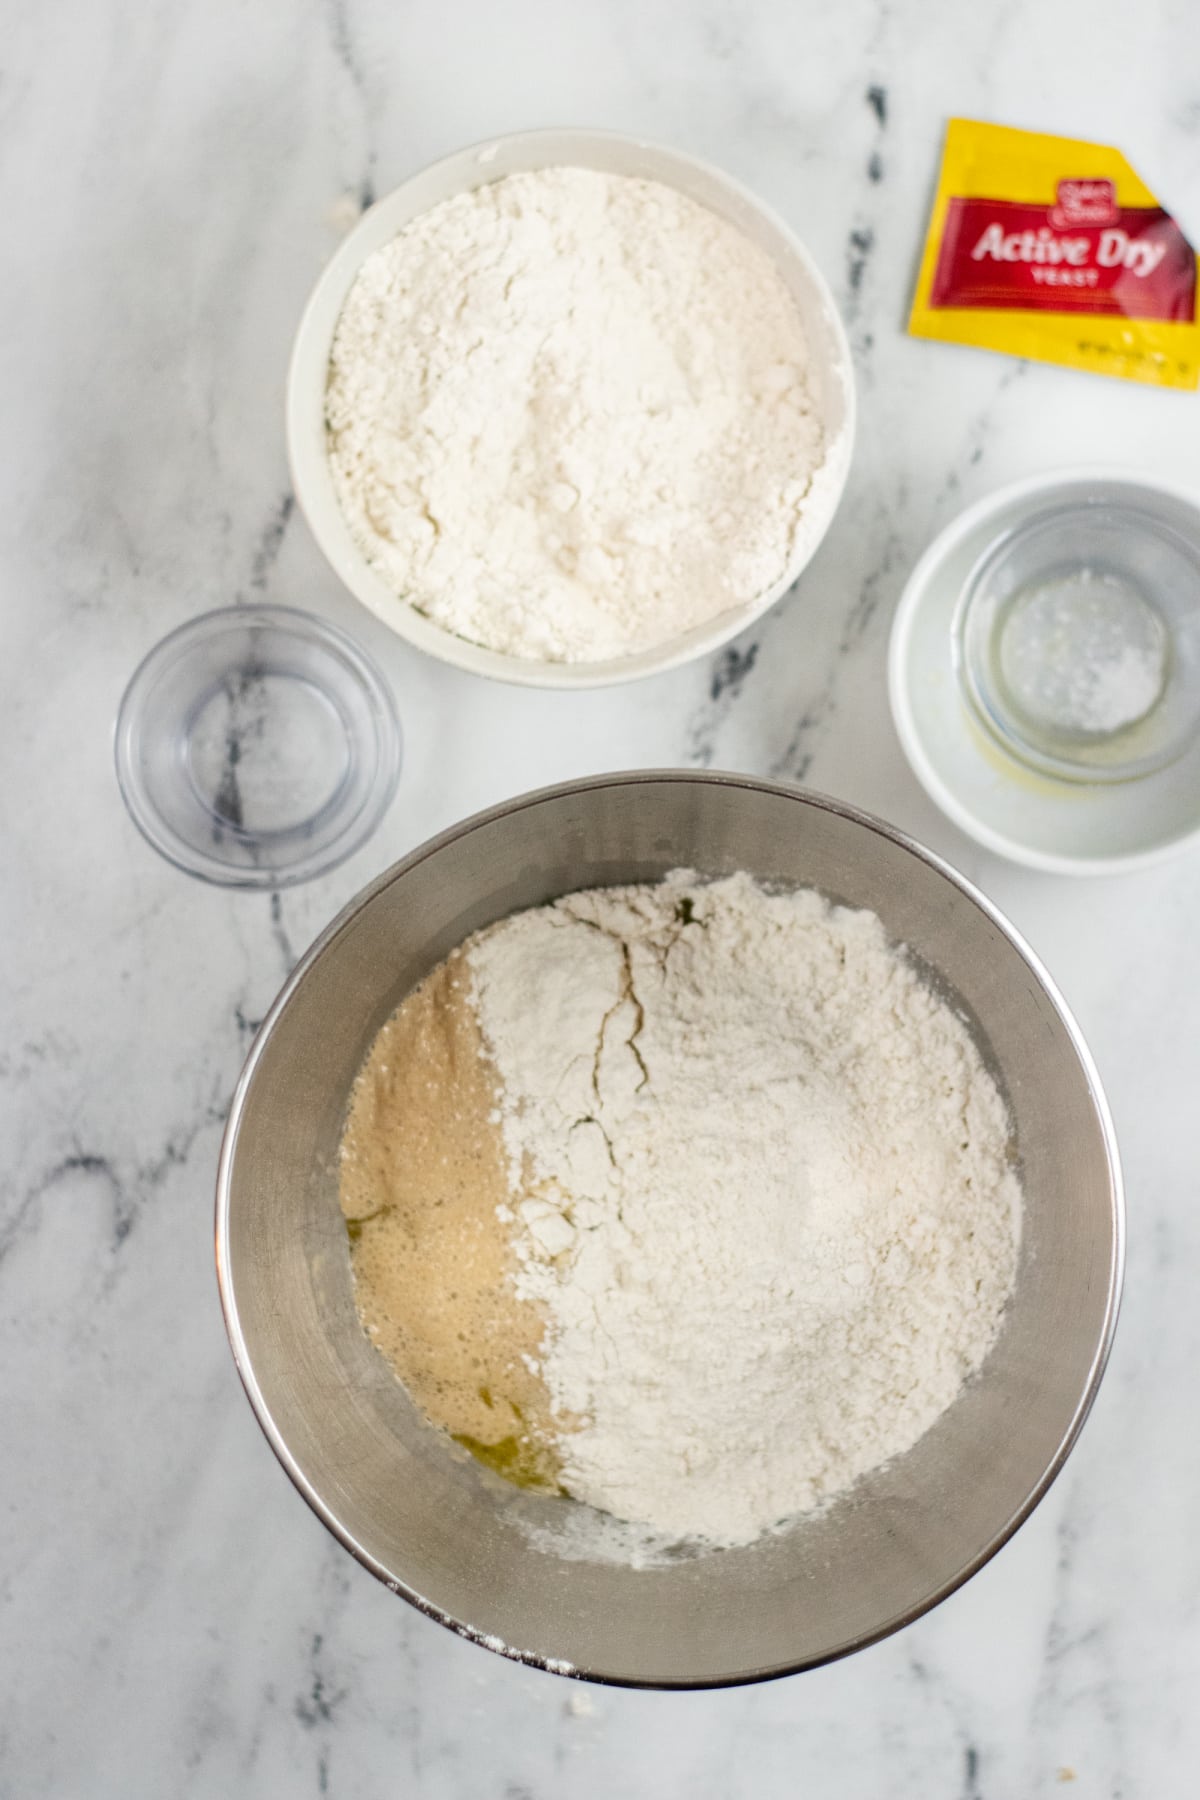 Yeast mixture with flour added